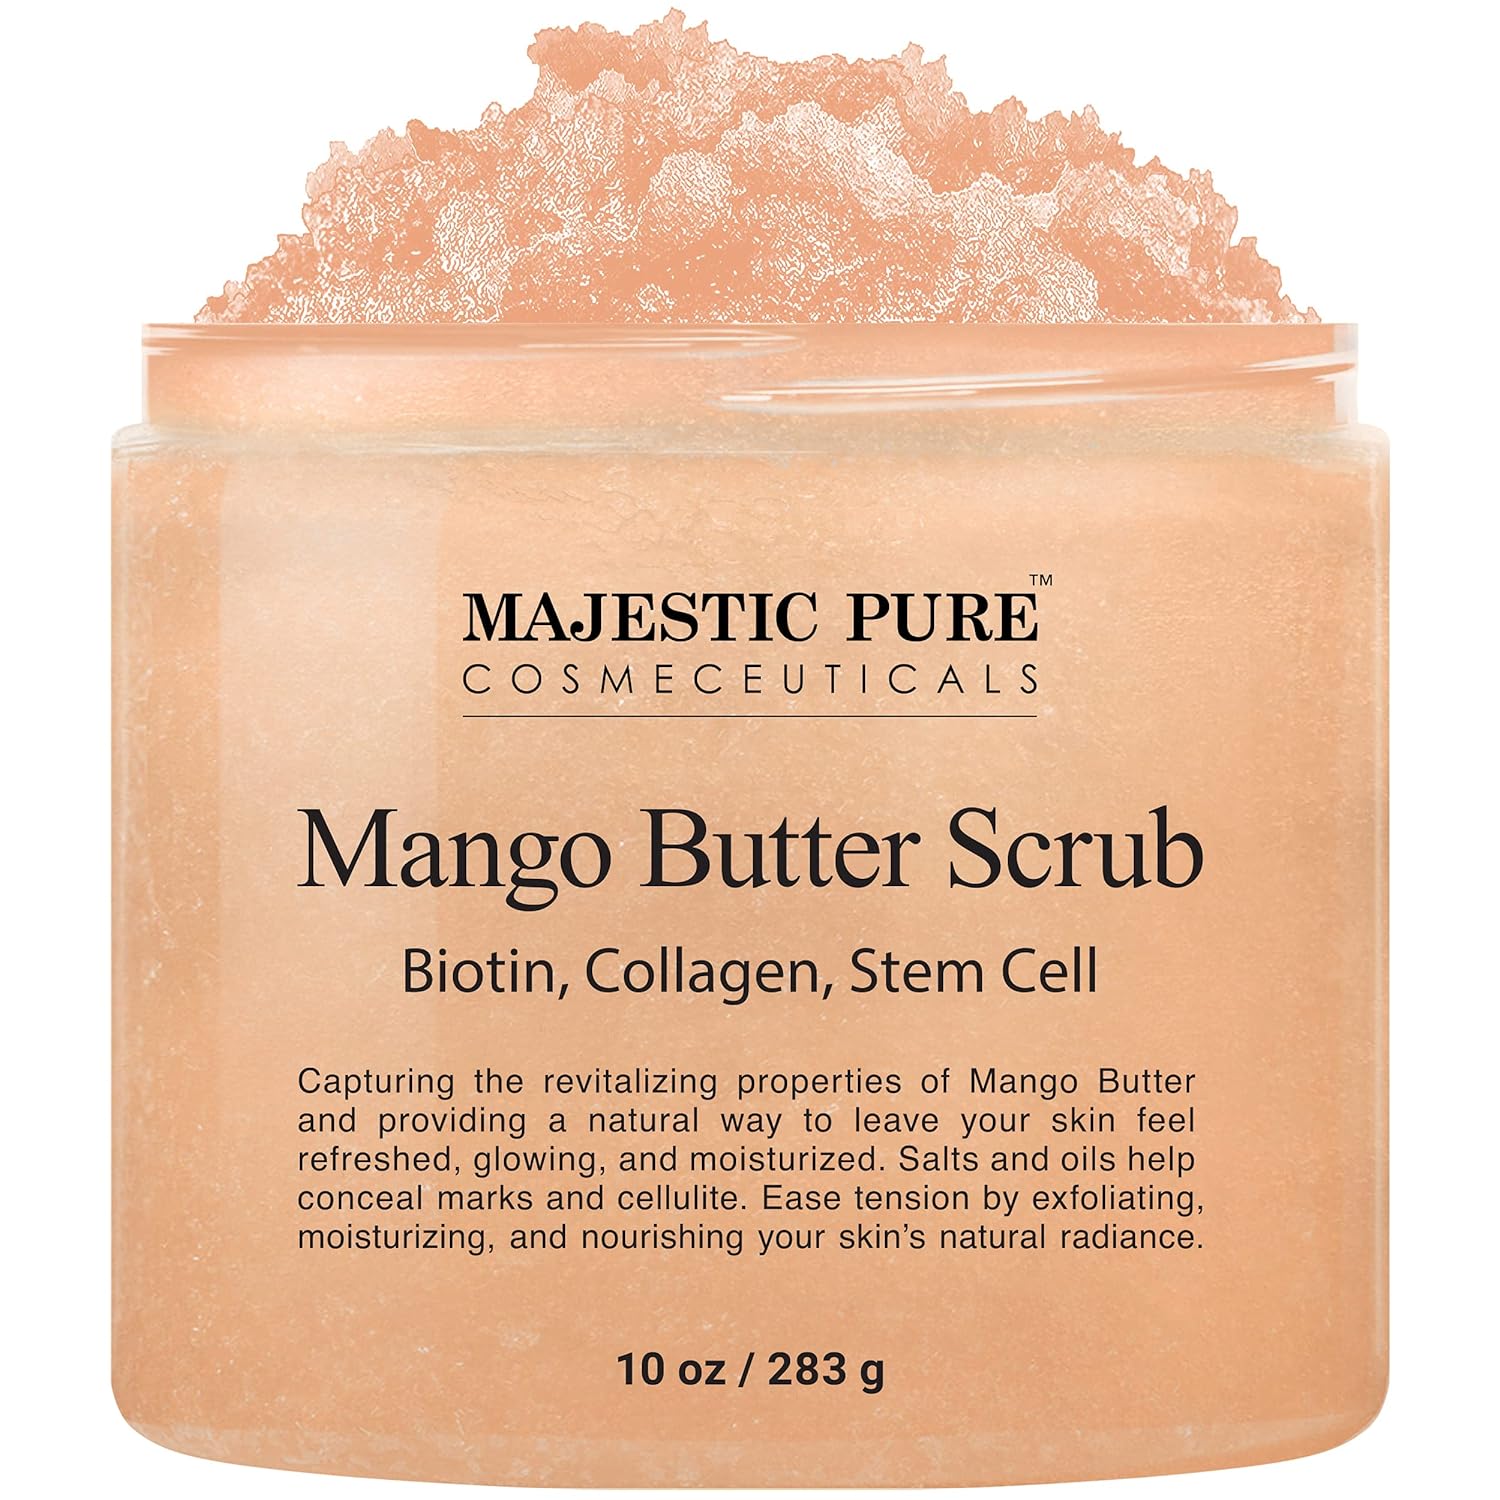 Majestic Pure Mango Butter Body Scrub - With Biotin, Collagen, Stem Cell - Exfoliating Salt Scrub to Exfoliate and Moisturize Skin - Deep Skin Cleanser - Natural Skin Care for Men and Women - 10 oz